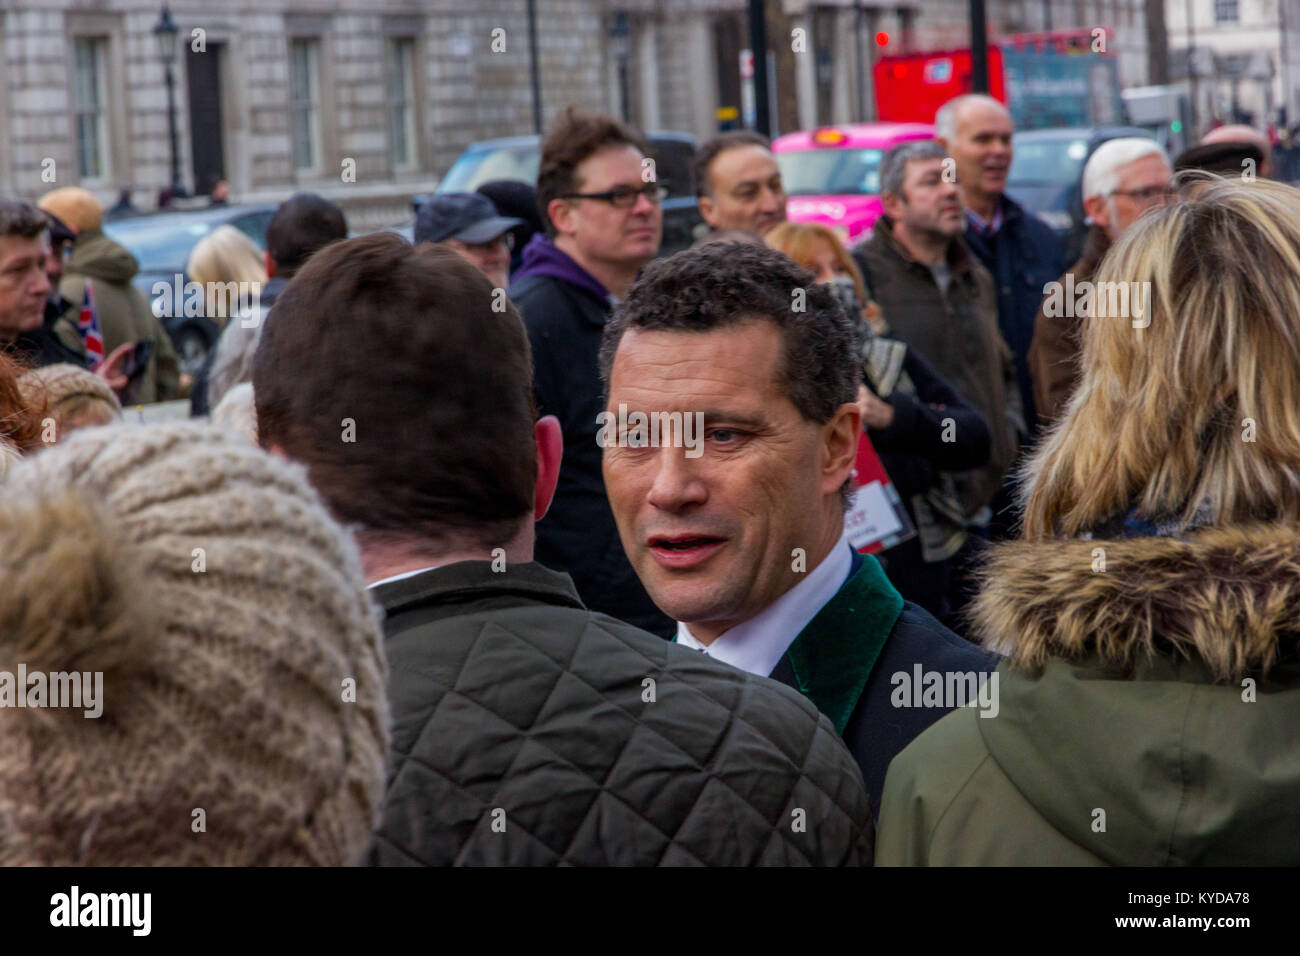 Downing Street, Westminster, London, UK. 14th Jan, 2018. Former UKIP member Steven Woolfe addresses a group of Pro Brexit supporters opposite the gates of Downing street. A lone remain supporter attempted to disrupt the meeting. Credit: Alan Fraser/Alamy Live News Stock Photo